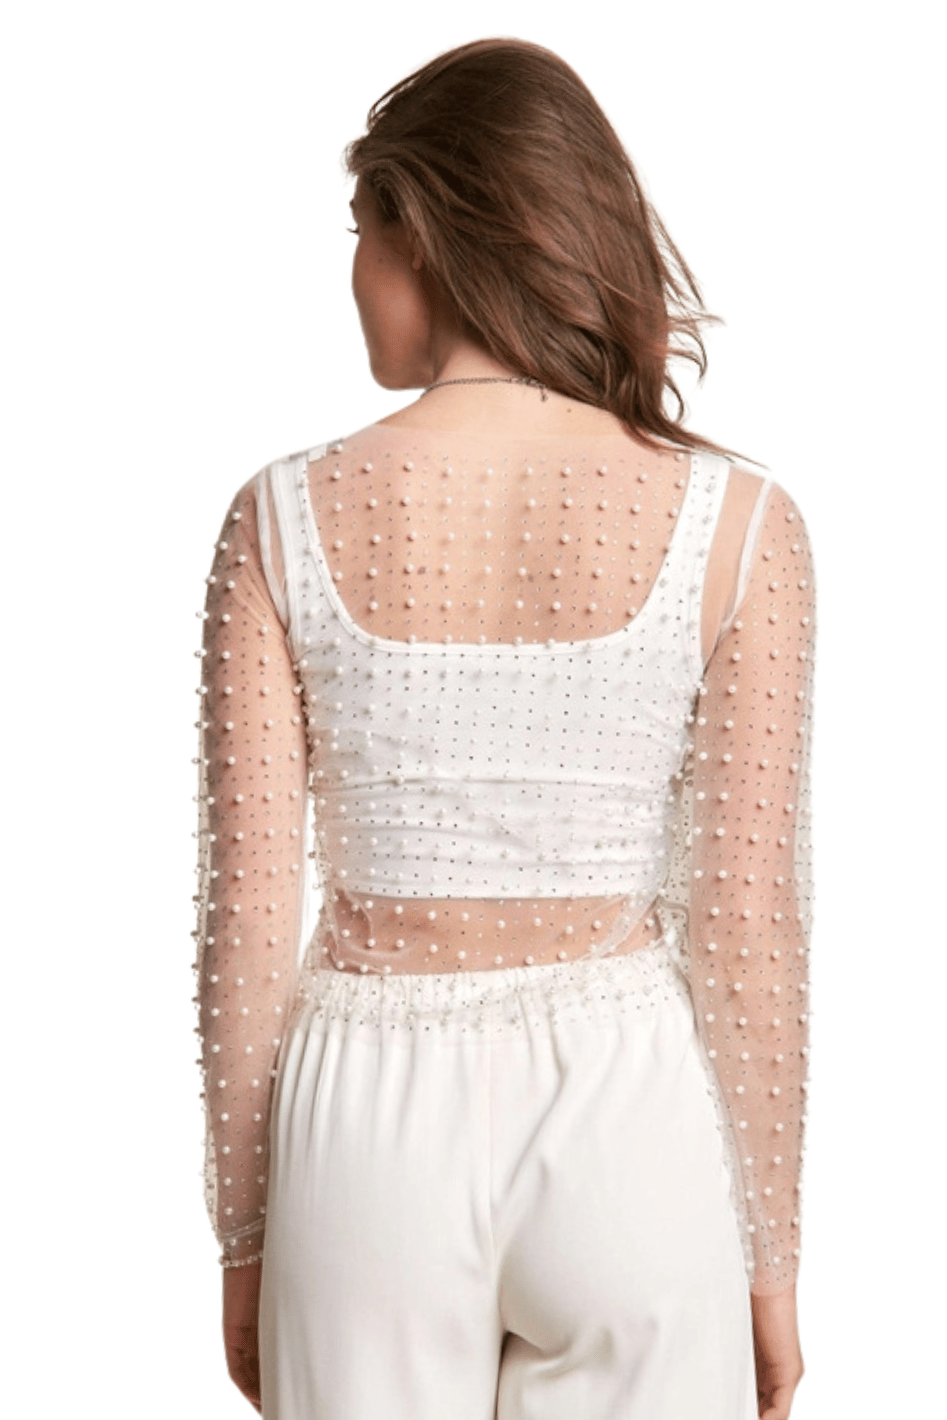 Pearl Essence Mesh Long Sleeve Top - Expressive Collective CO.